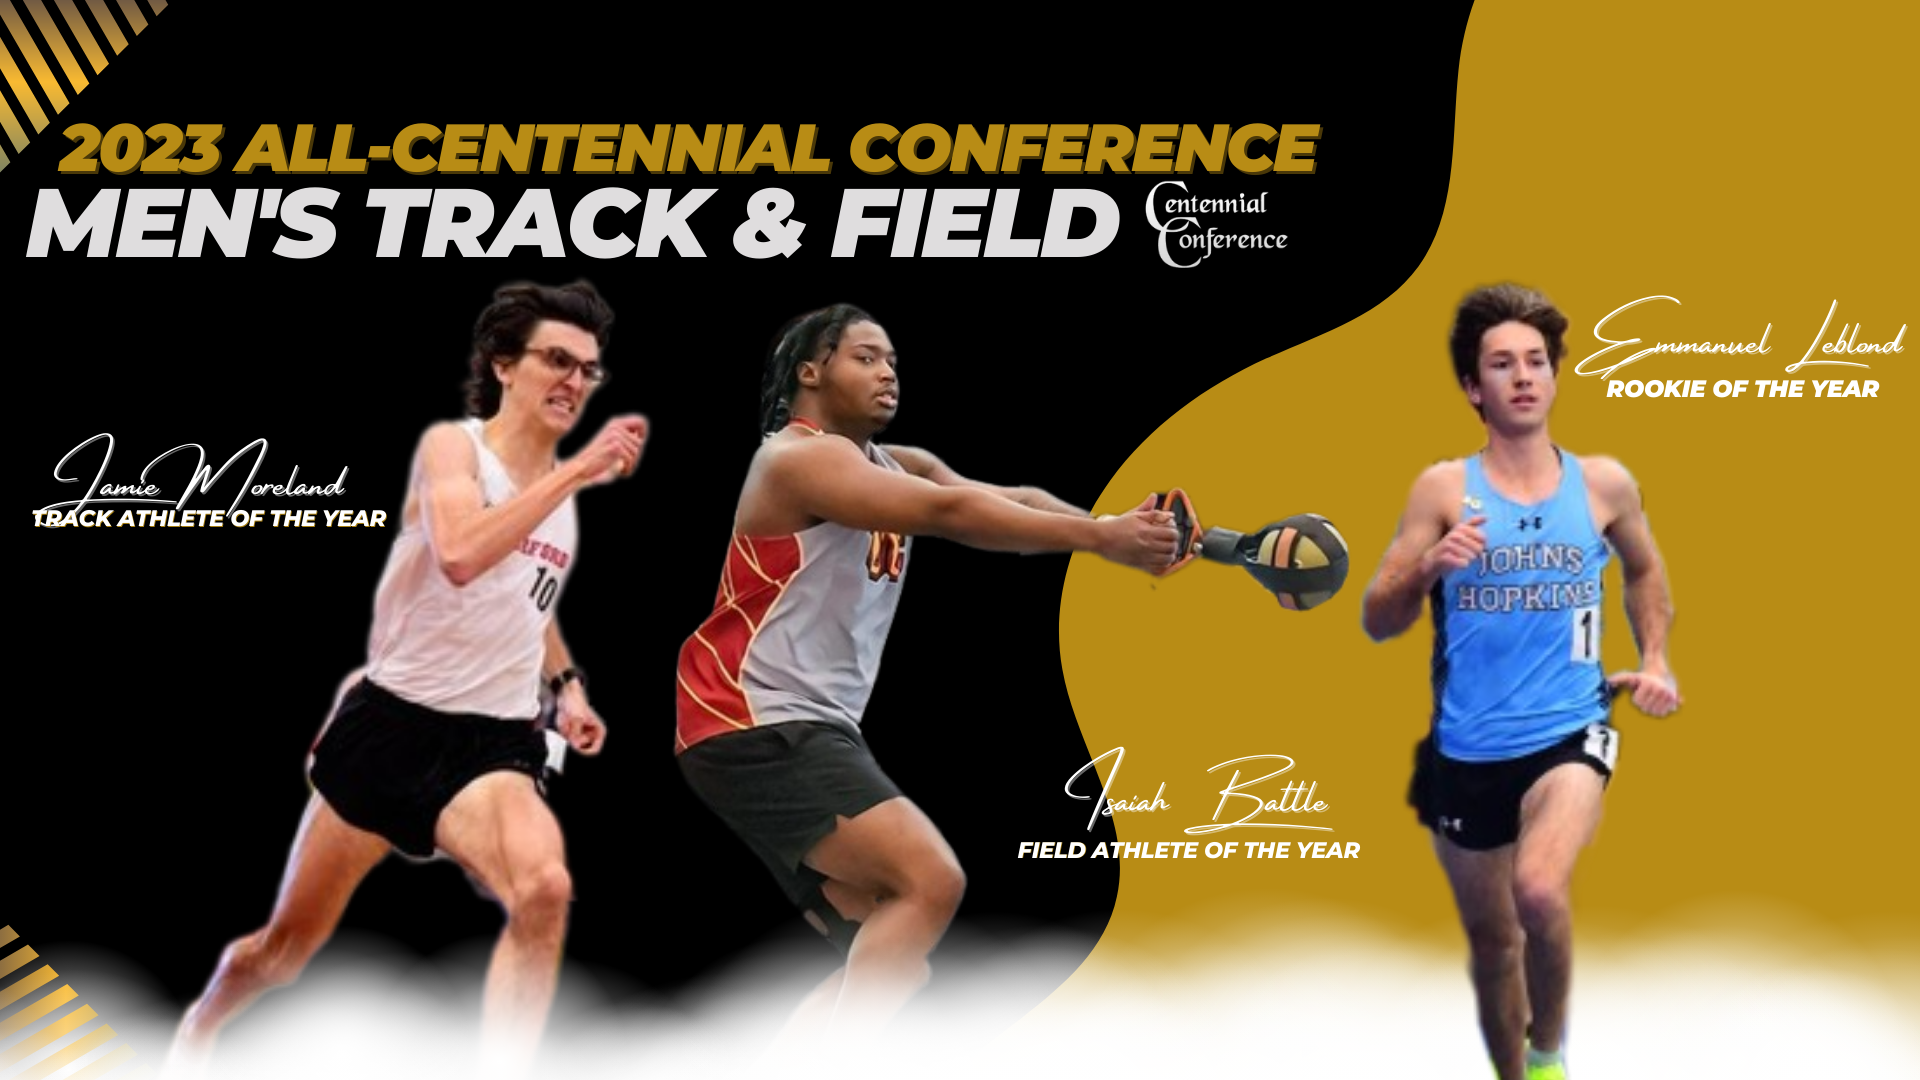 All-CC Men's Indoor Track & Field Team: Moreland & Battle Named Athletes of the Year